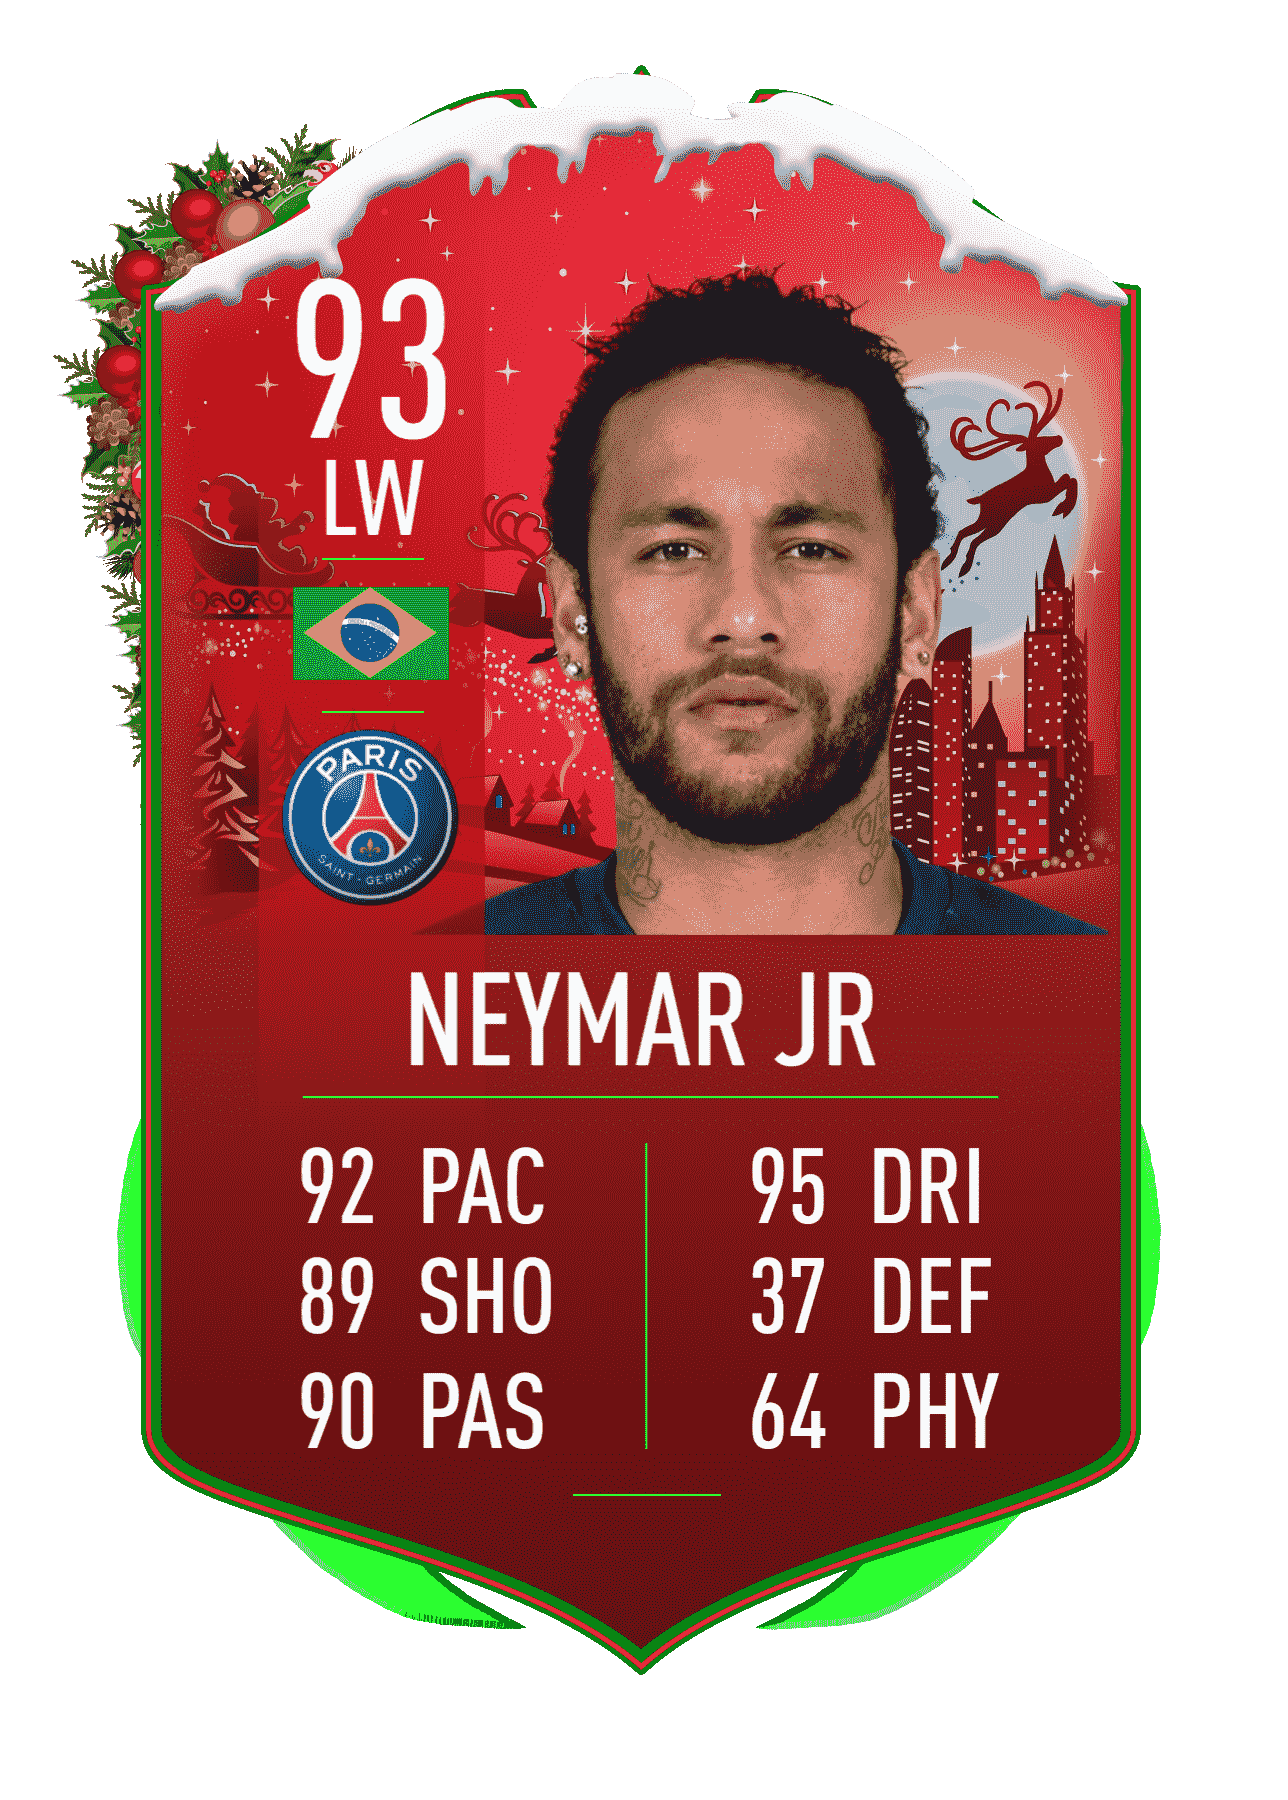 TRICKSTER! Neymar would be a popular addition to this week's promo